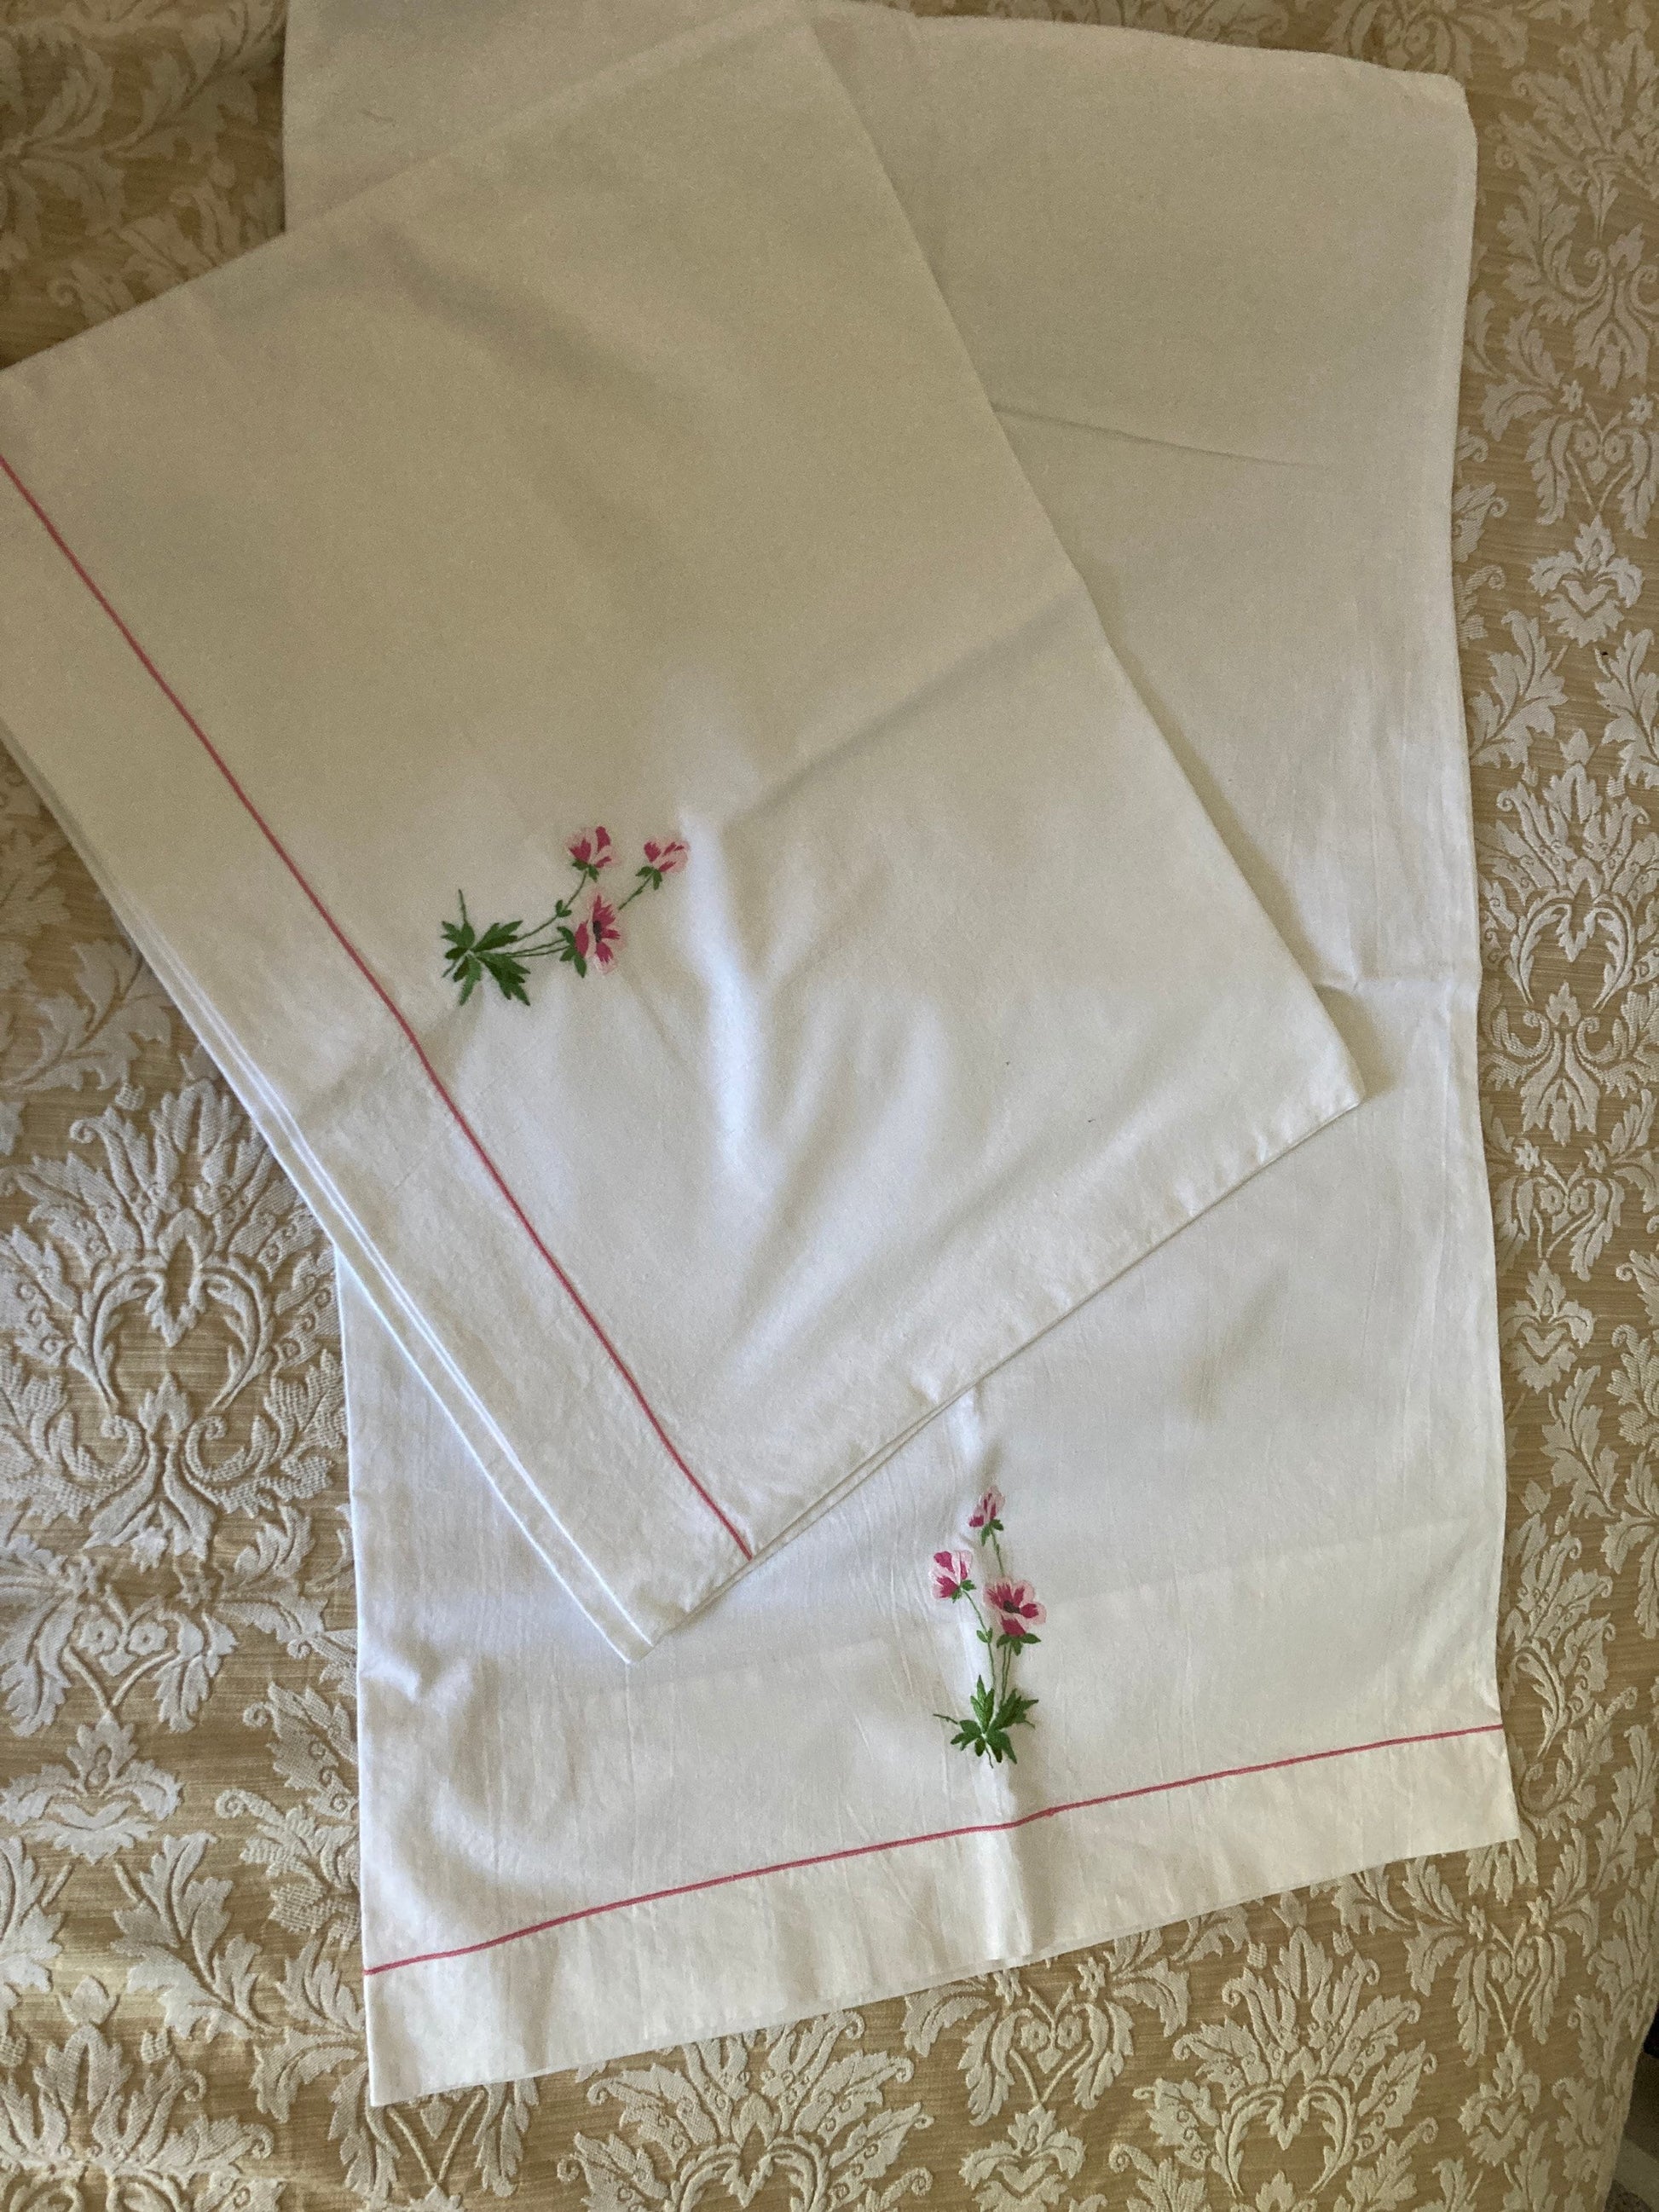 Pair pillowcases bedding white cotton embroidered floral flower 29 x 19 pink green